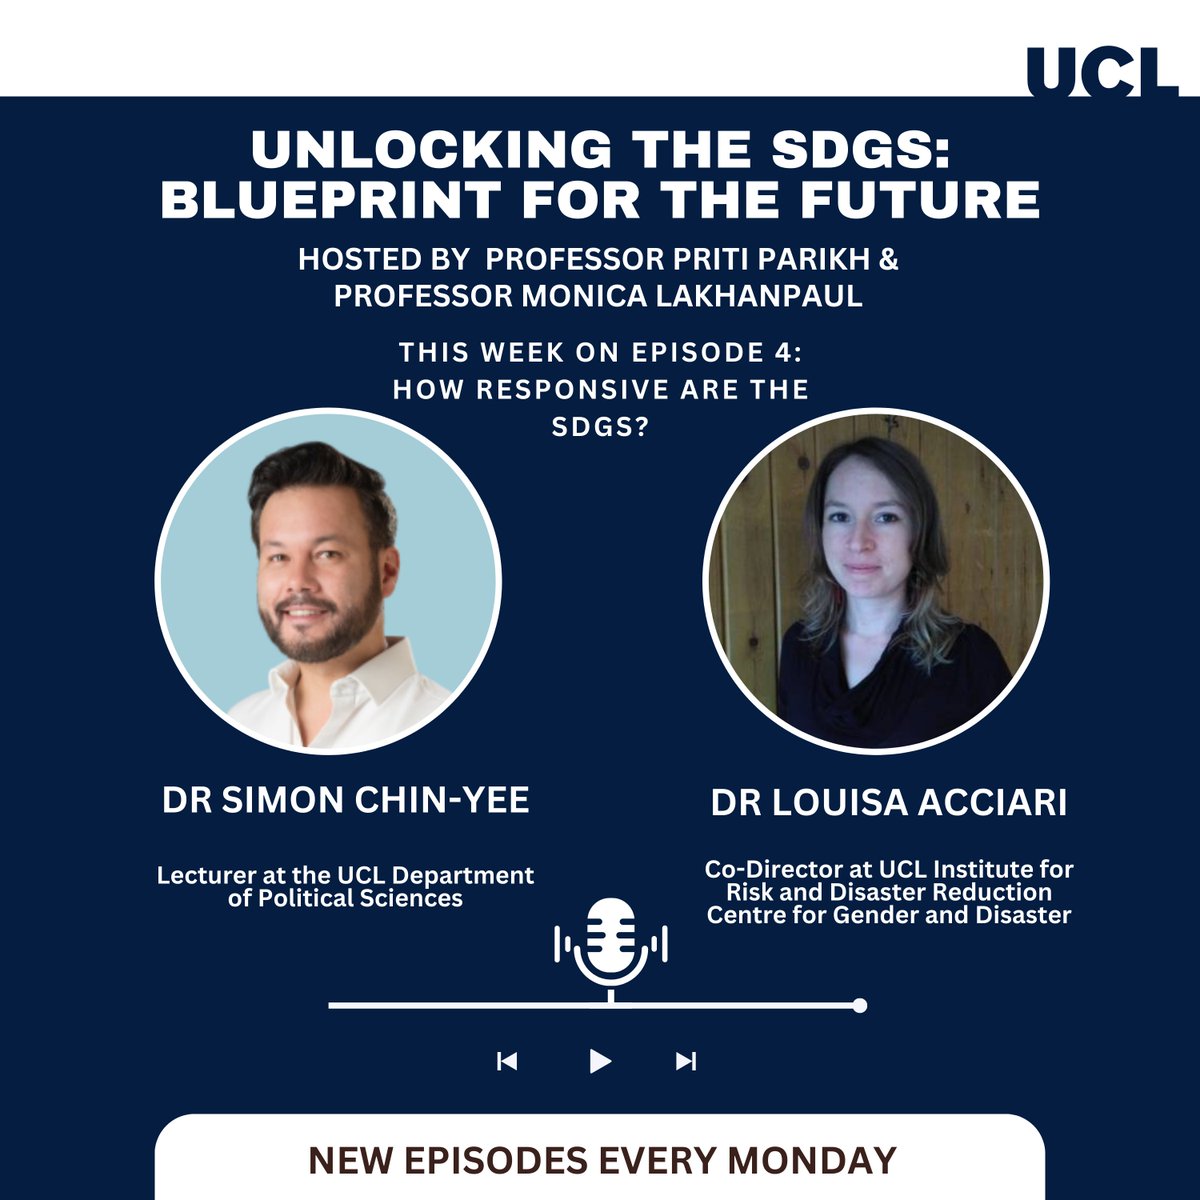 Unlocking the SDGs #podcast ep 4 sees hosts @ProfLakhanpaul & @pritiparikh73 joined by @SimonChinYee & Louisa Acciari @UCLIRDR @UCL_GD. How responsive are the #SDGs? Listen soundcloud.com/uclsound/sets/…